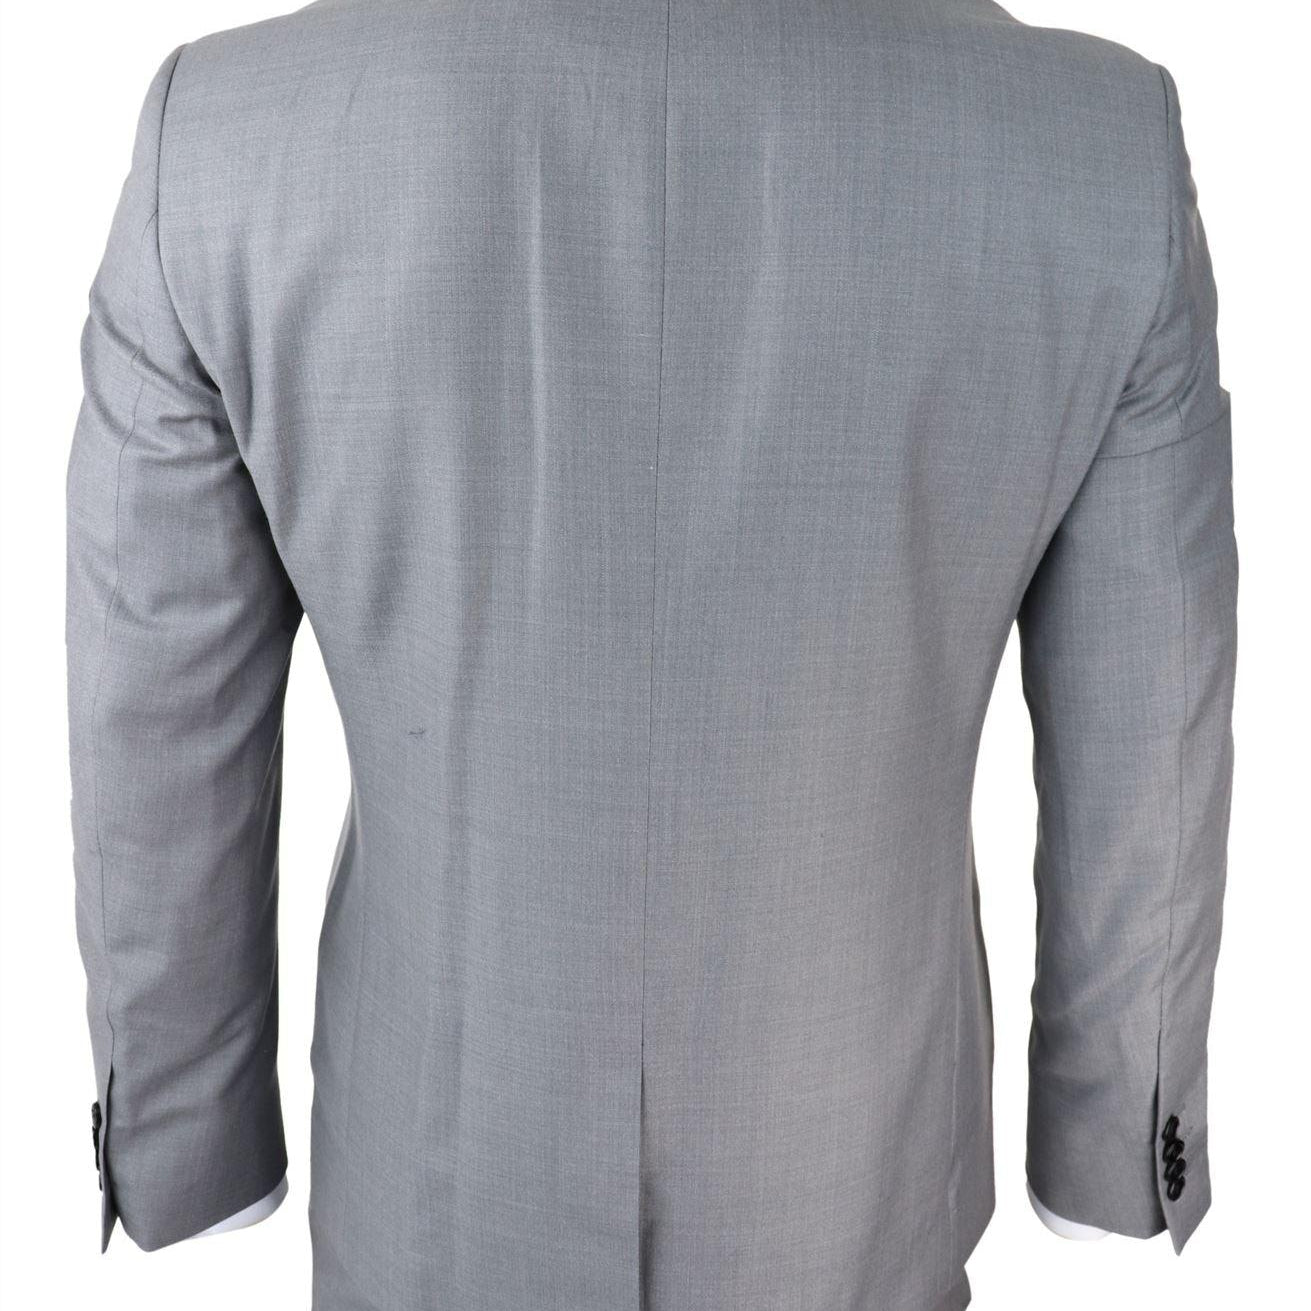 Mens Light Grey 3 Piece Suit Classic Stitch Wedding Summer Prom Classic Grooms-TruClothing